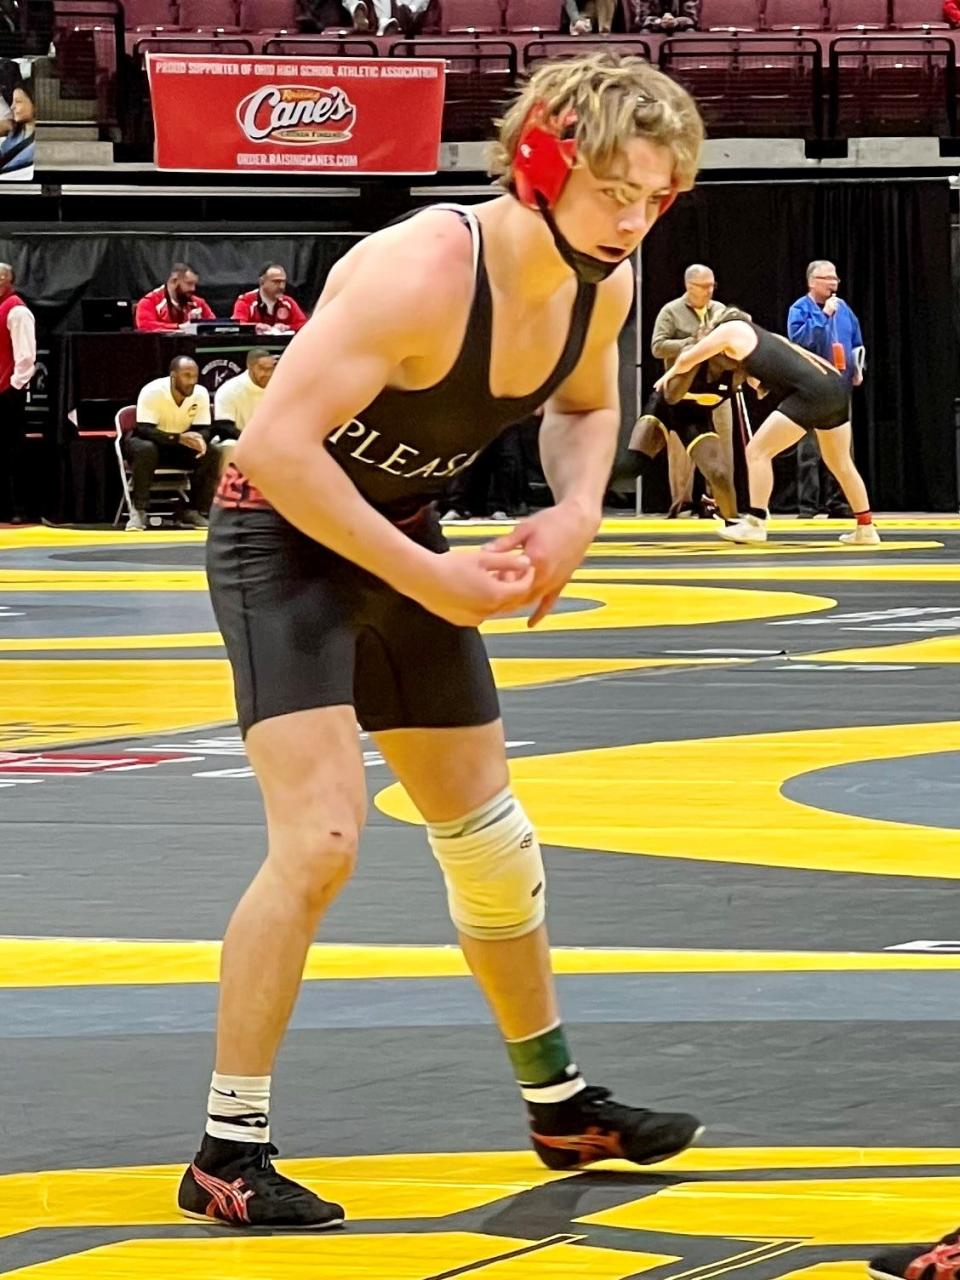 Pleasant's Daxton Chase competes in the final day of the state wrestling championships last year at Ohio State's Schottenstein Center. Now a senior, Chase will join his older brother as a wrestler at Ohio State after signing with the Buckeyes last week.